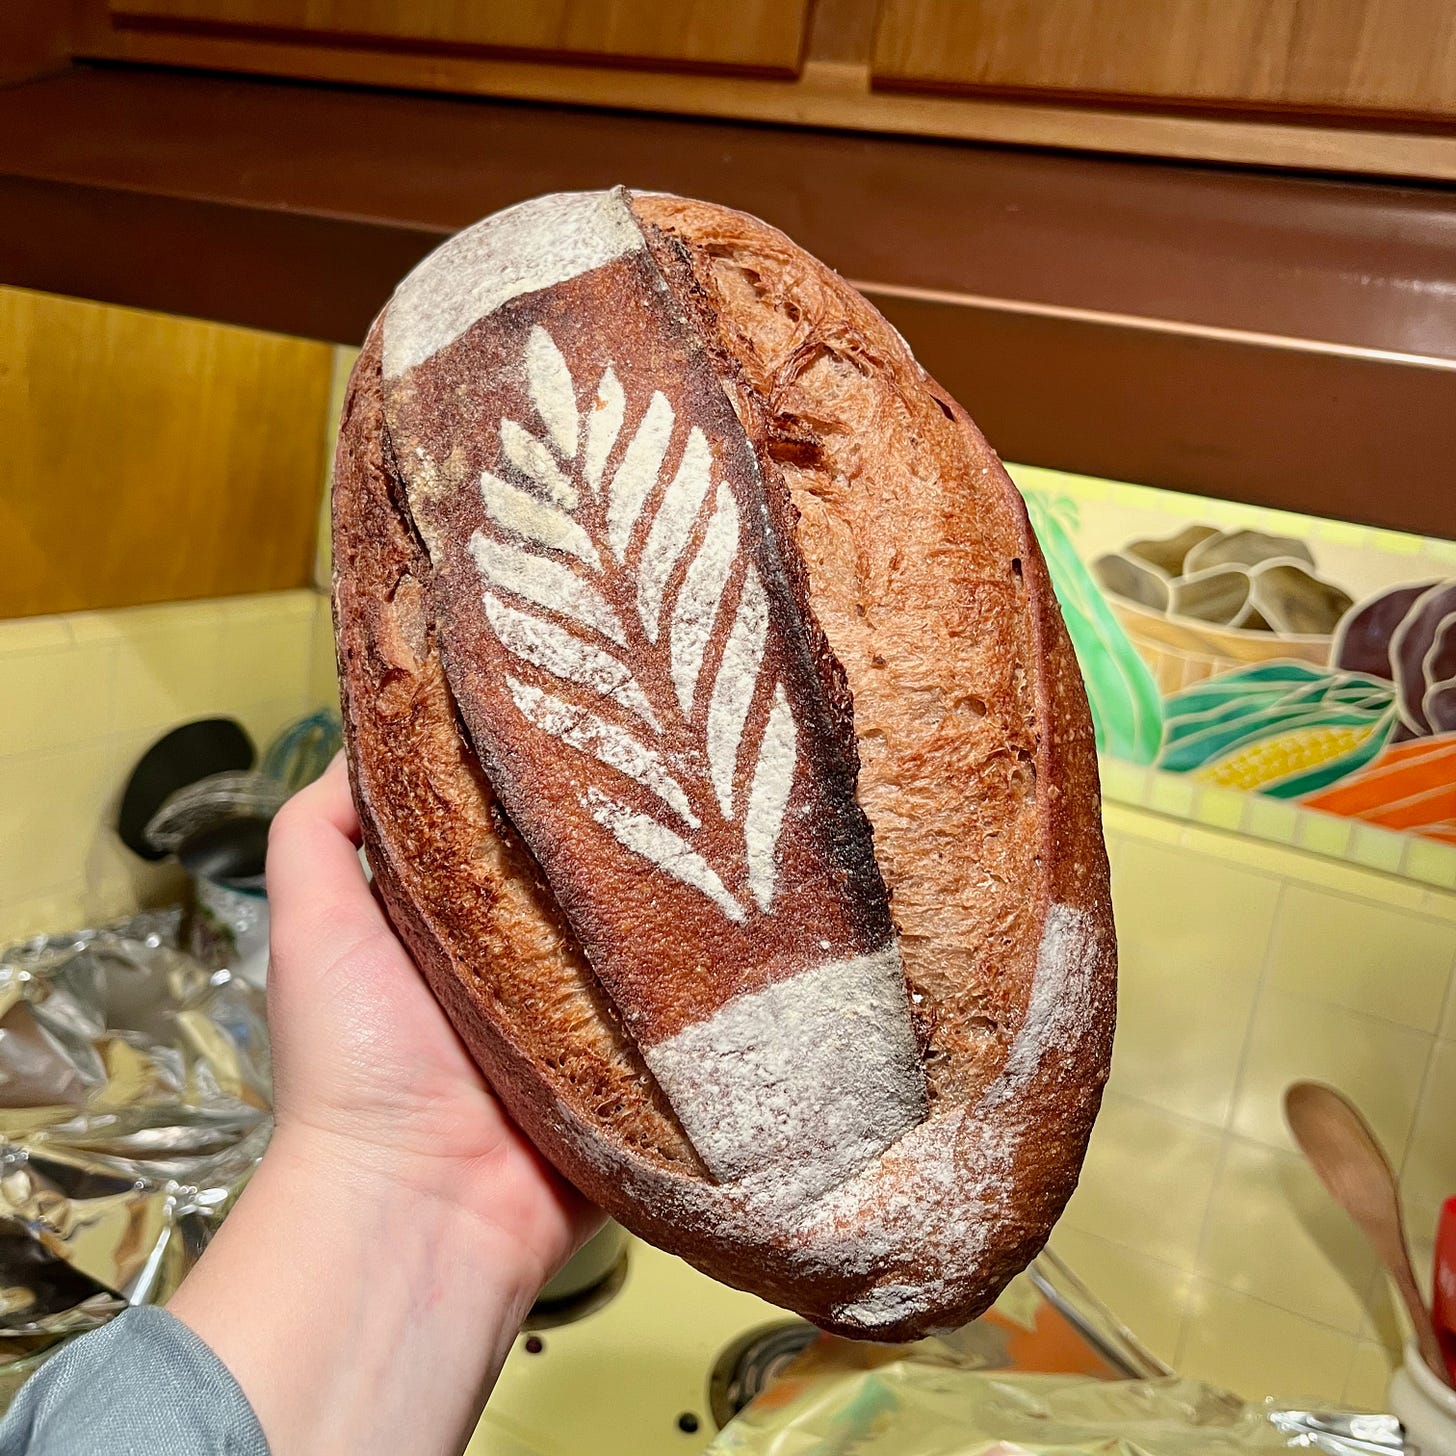 I'm holding up Barrio Bread’s Tibetan Purple Barley Loaf in front of my stove